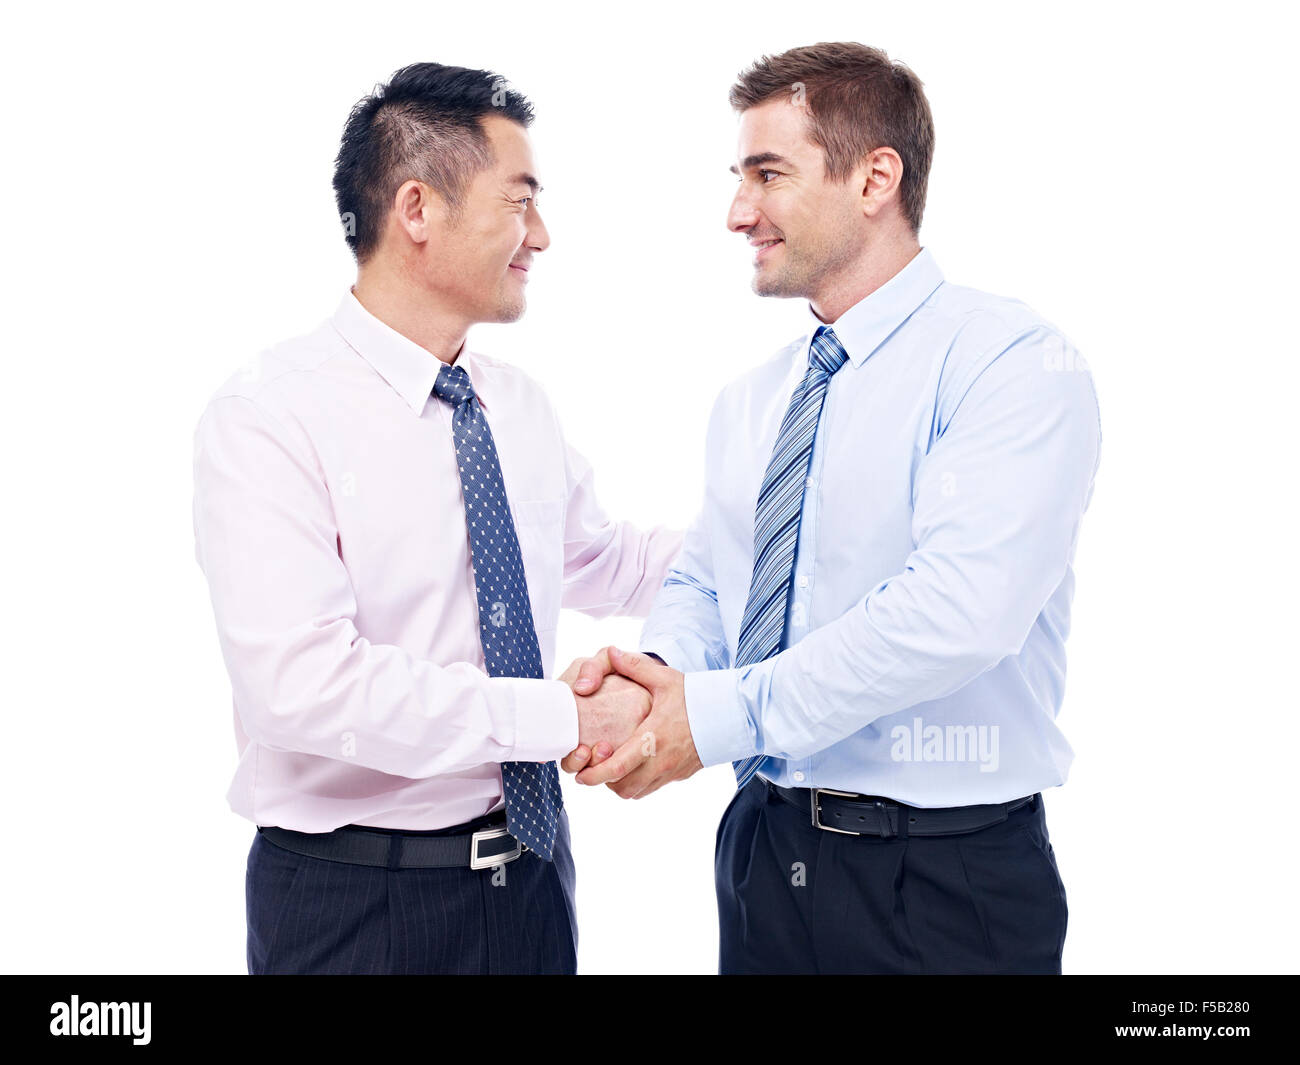 Asian and Caucasian businessmen shaking hands Banque D'Images